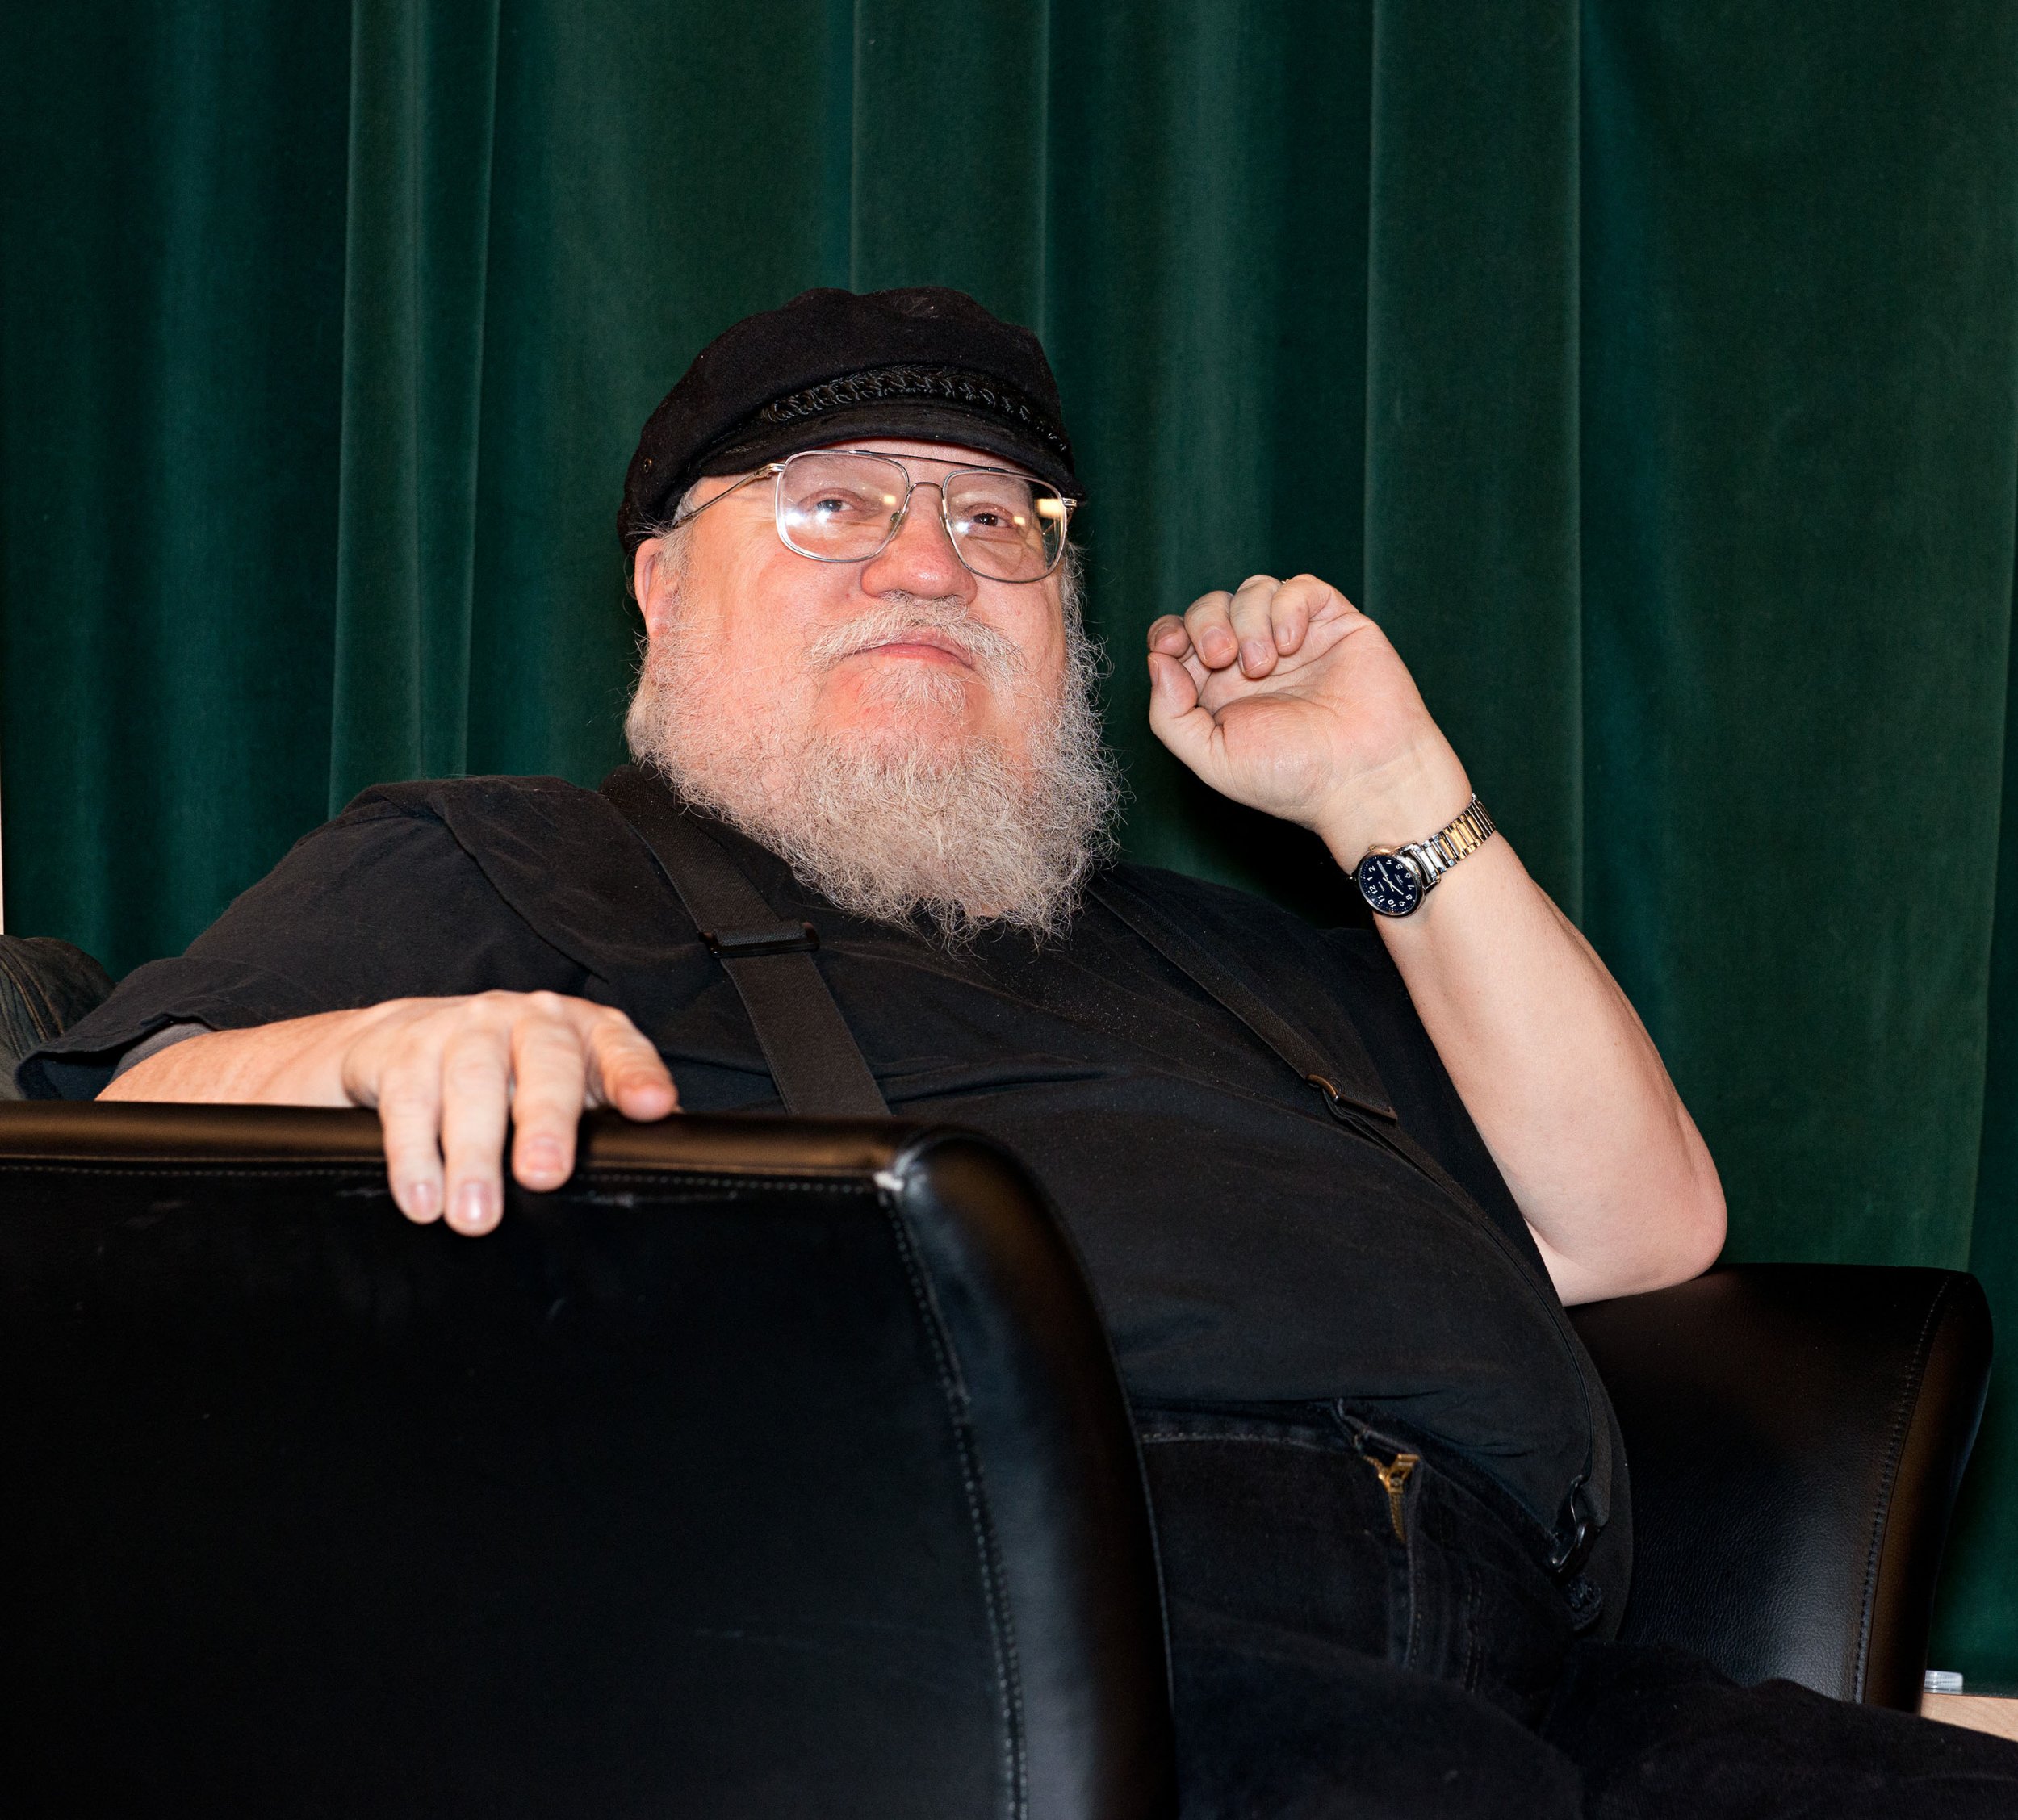 Game of Thrones writer George R. R. Martin